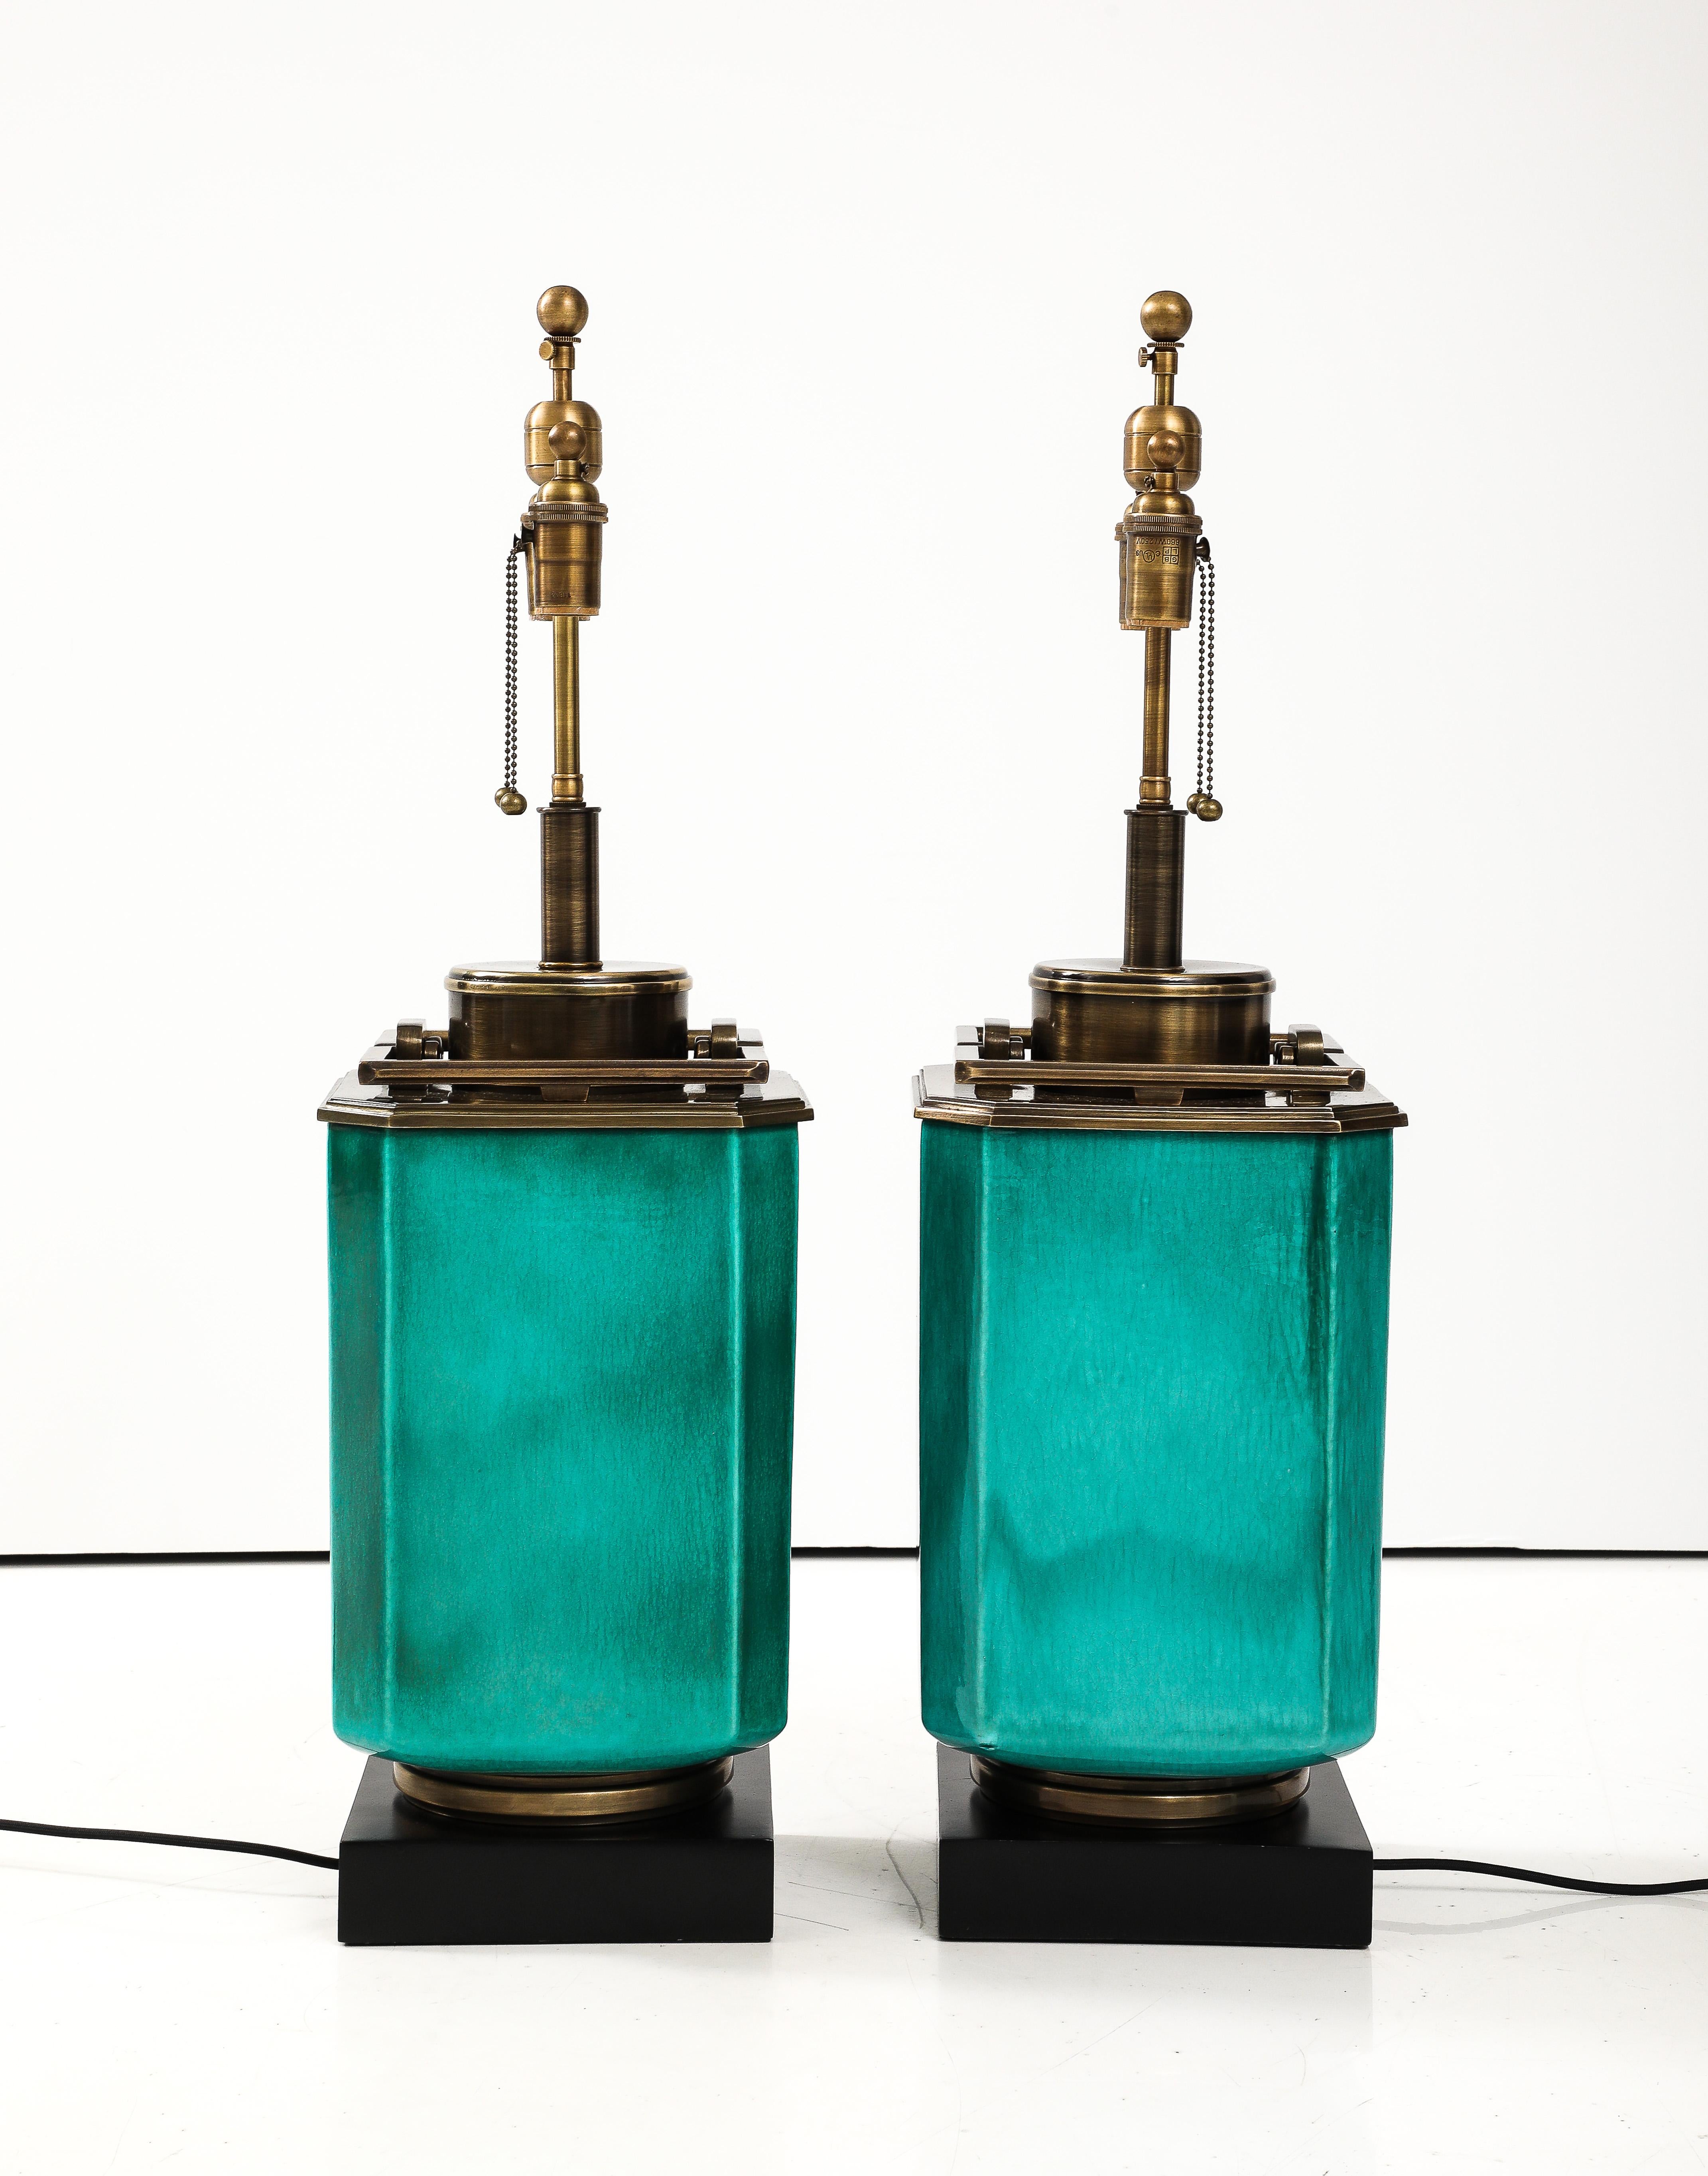 Pair of 1960's Large Ceramic Lamps With a Jade Crackle Glaze Finish by Stiffel. For Sale 3